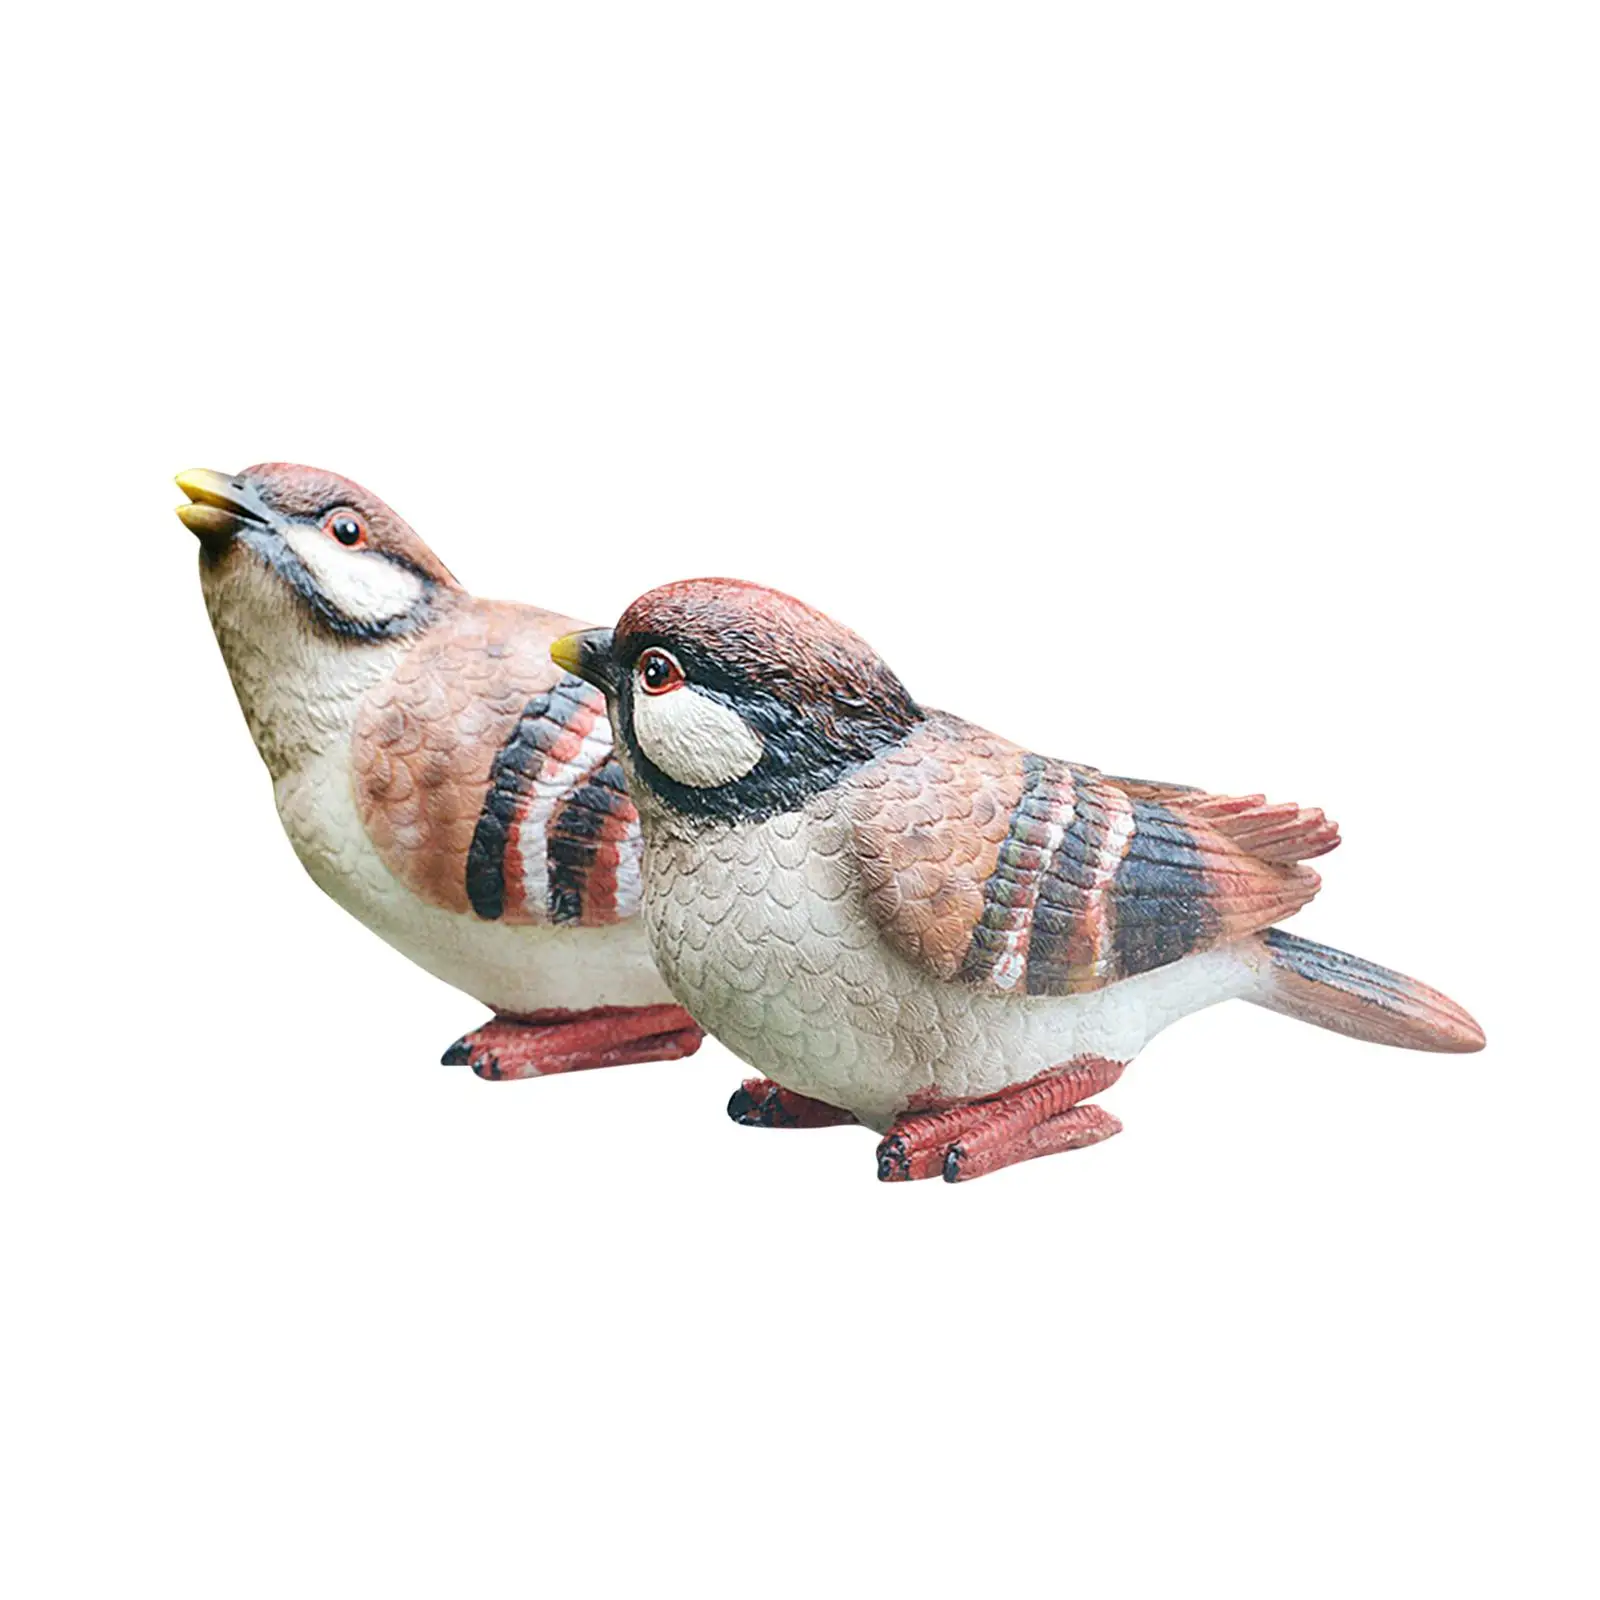 2Pcs Bird Statues Decorative Simulation Art Crafts Ornament Sculpture Figurines for Bookcase Outdoor Indoor Yard Office Lawn